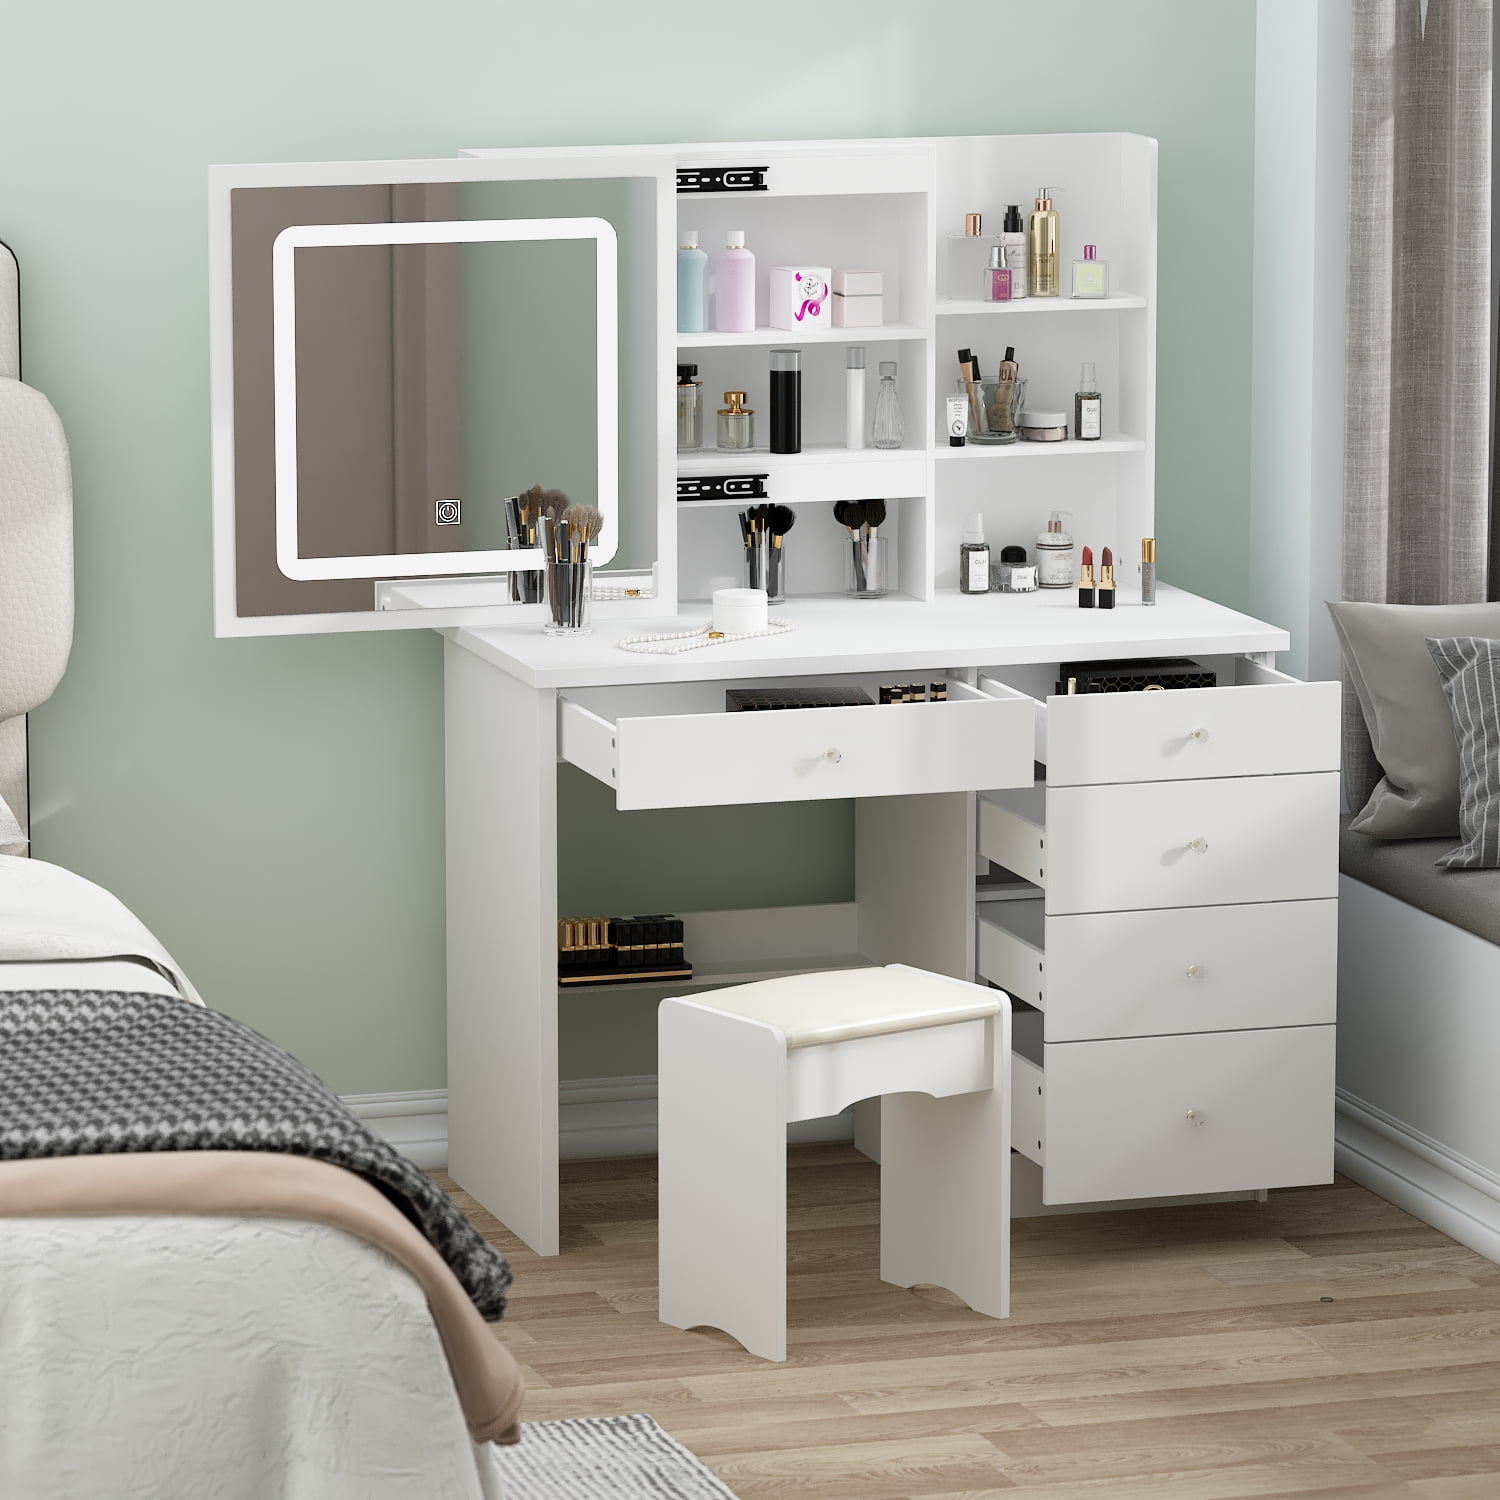 Hitow Makeup Vanity Table Set with Sliding Lighted Mirror, 5 Drawers Storage Shelves, Dressing Table Desk with Stool,White - Walmart.com